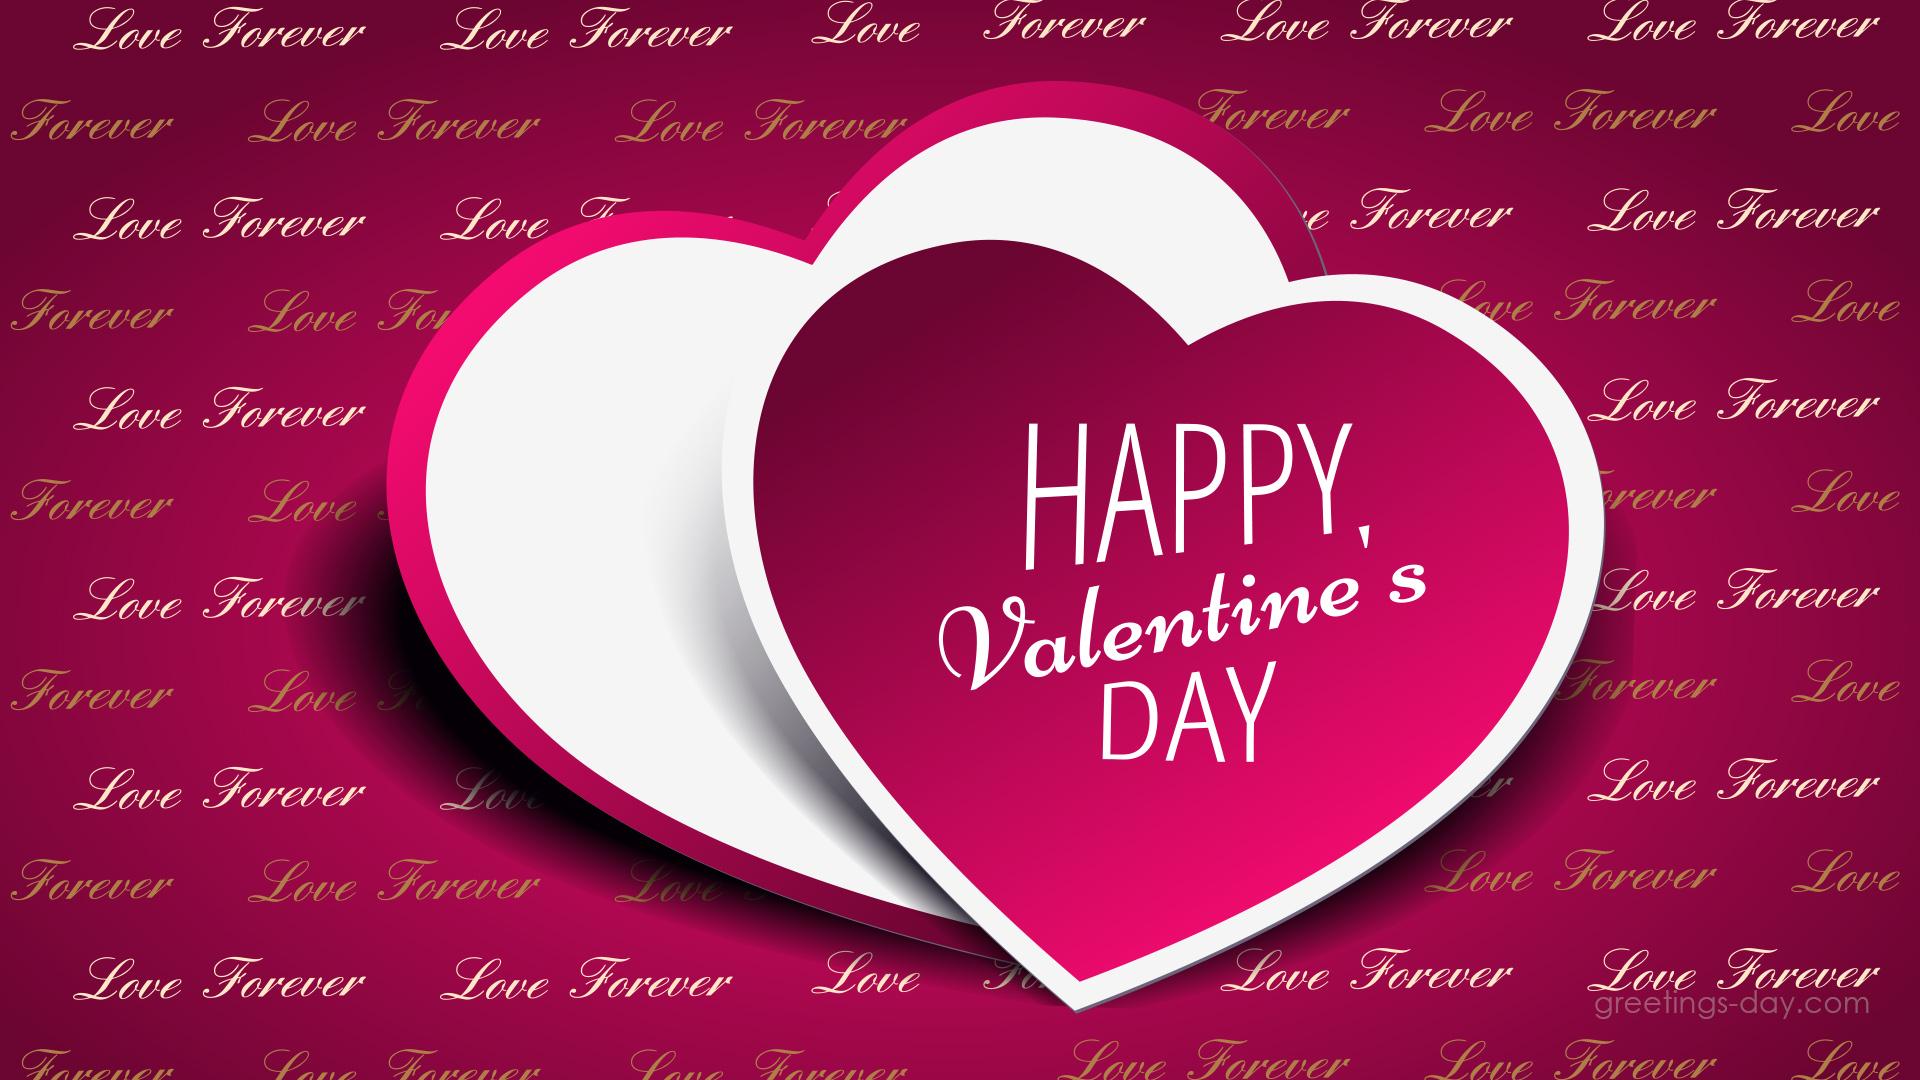 Tons of awesome Valentine's Day cards wallpapers to download for free....